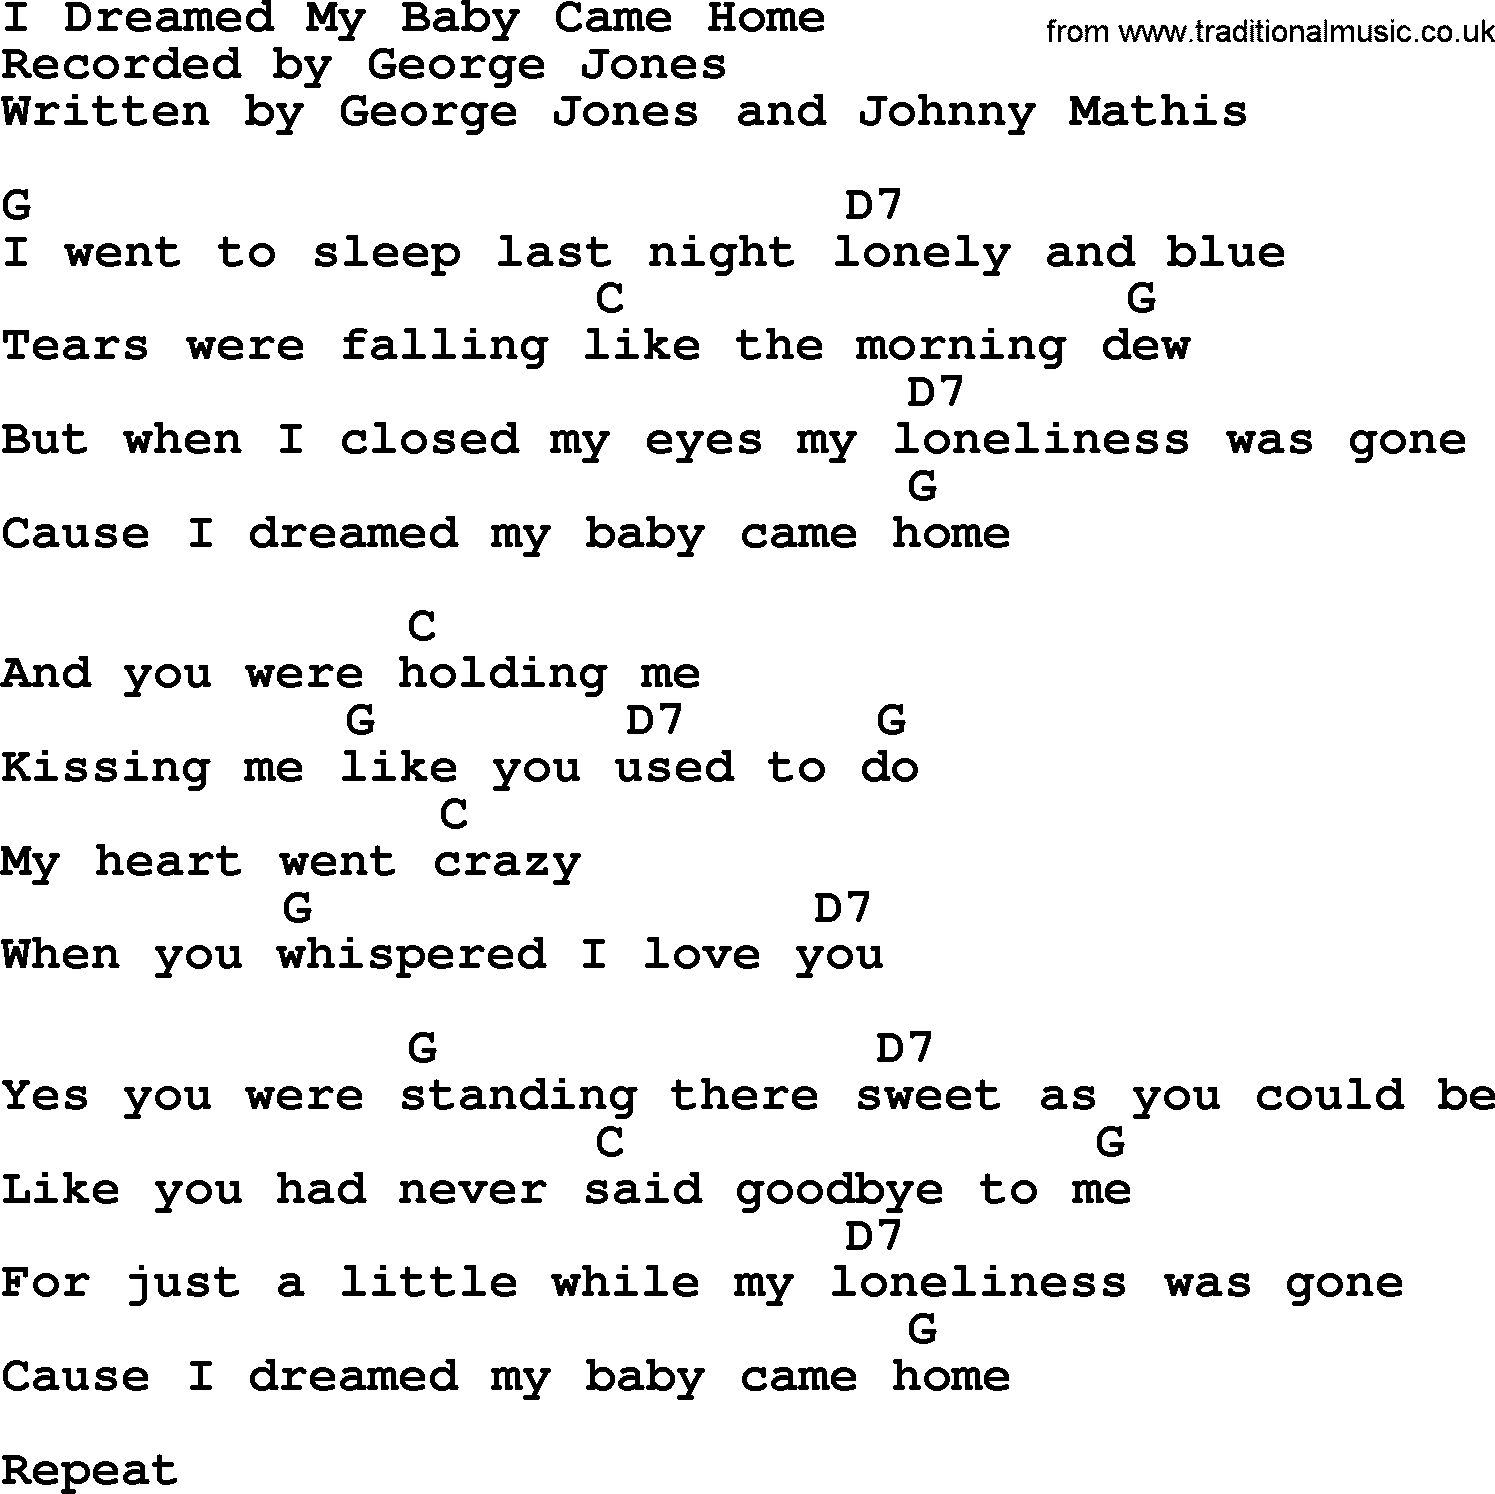 George Jones song: I Dreamed My Baby Came Home, lyrics and chords